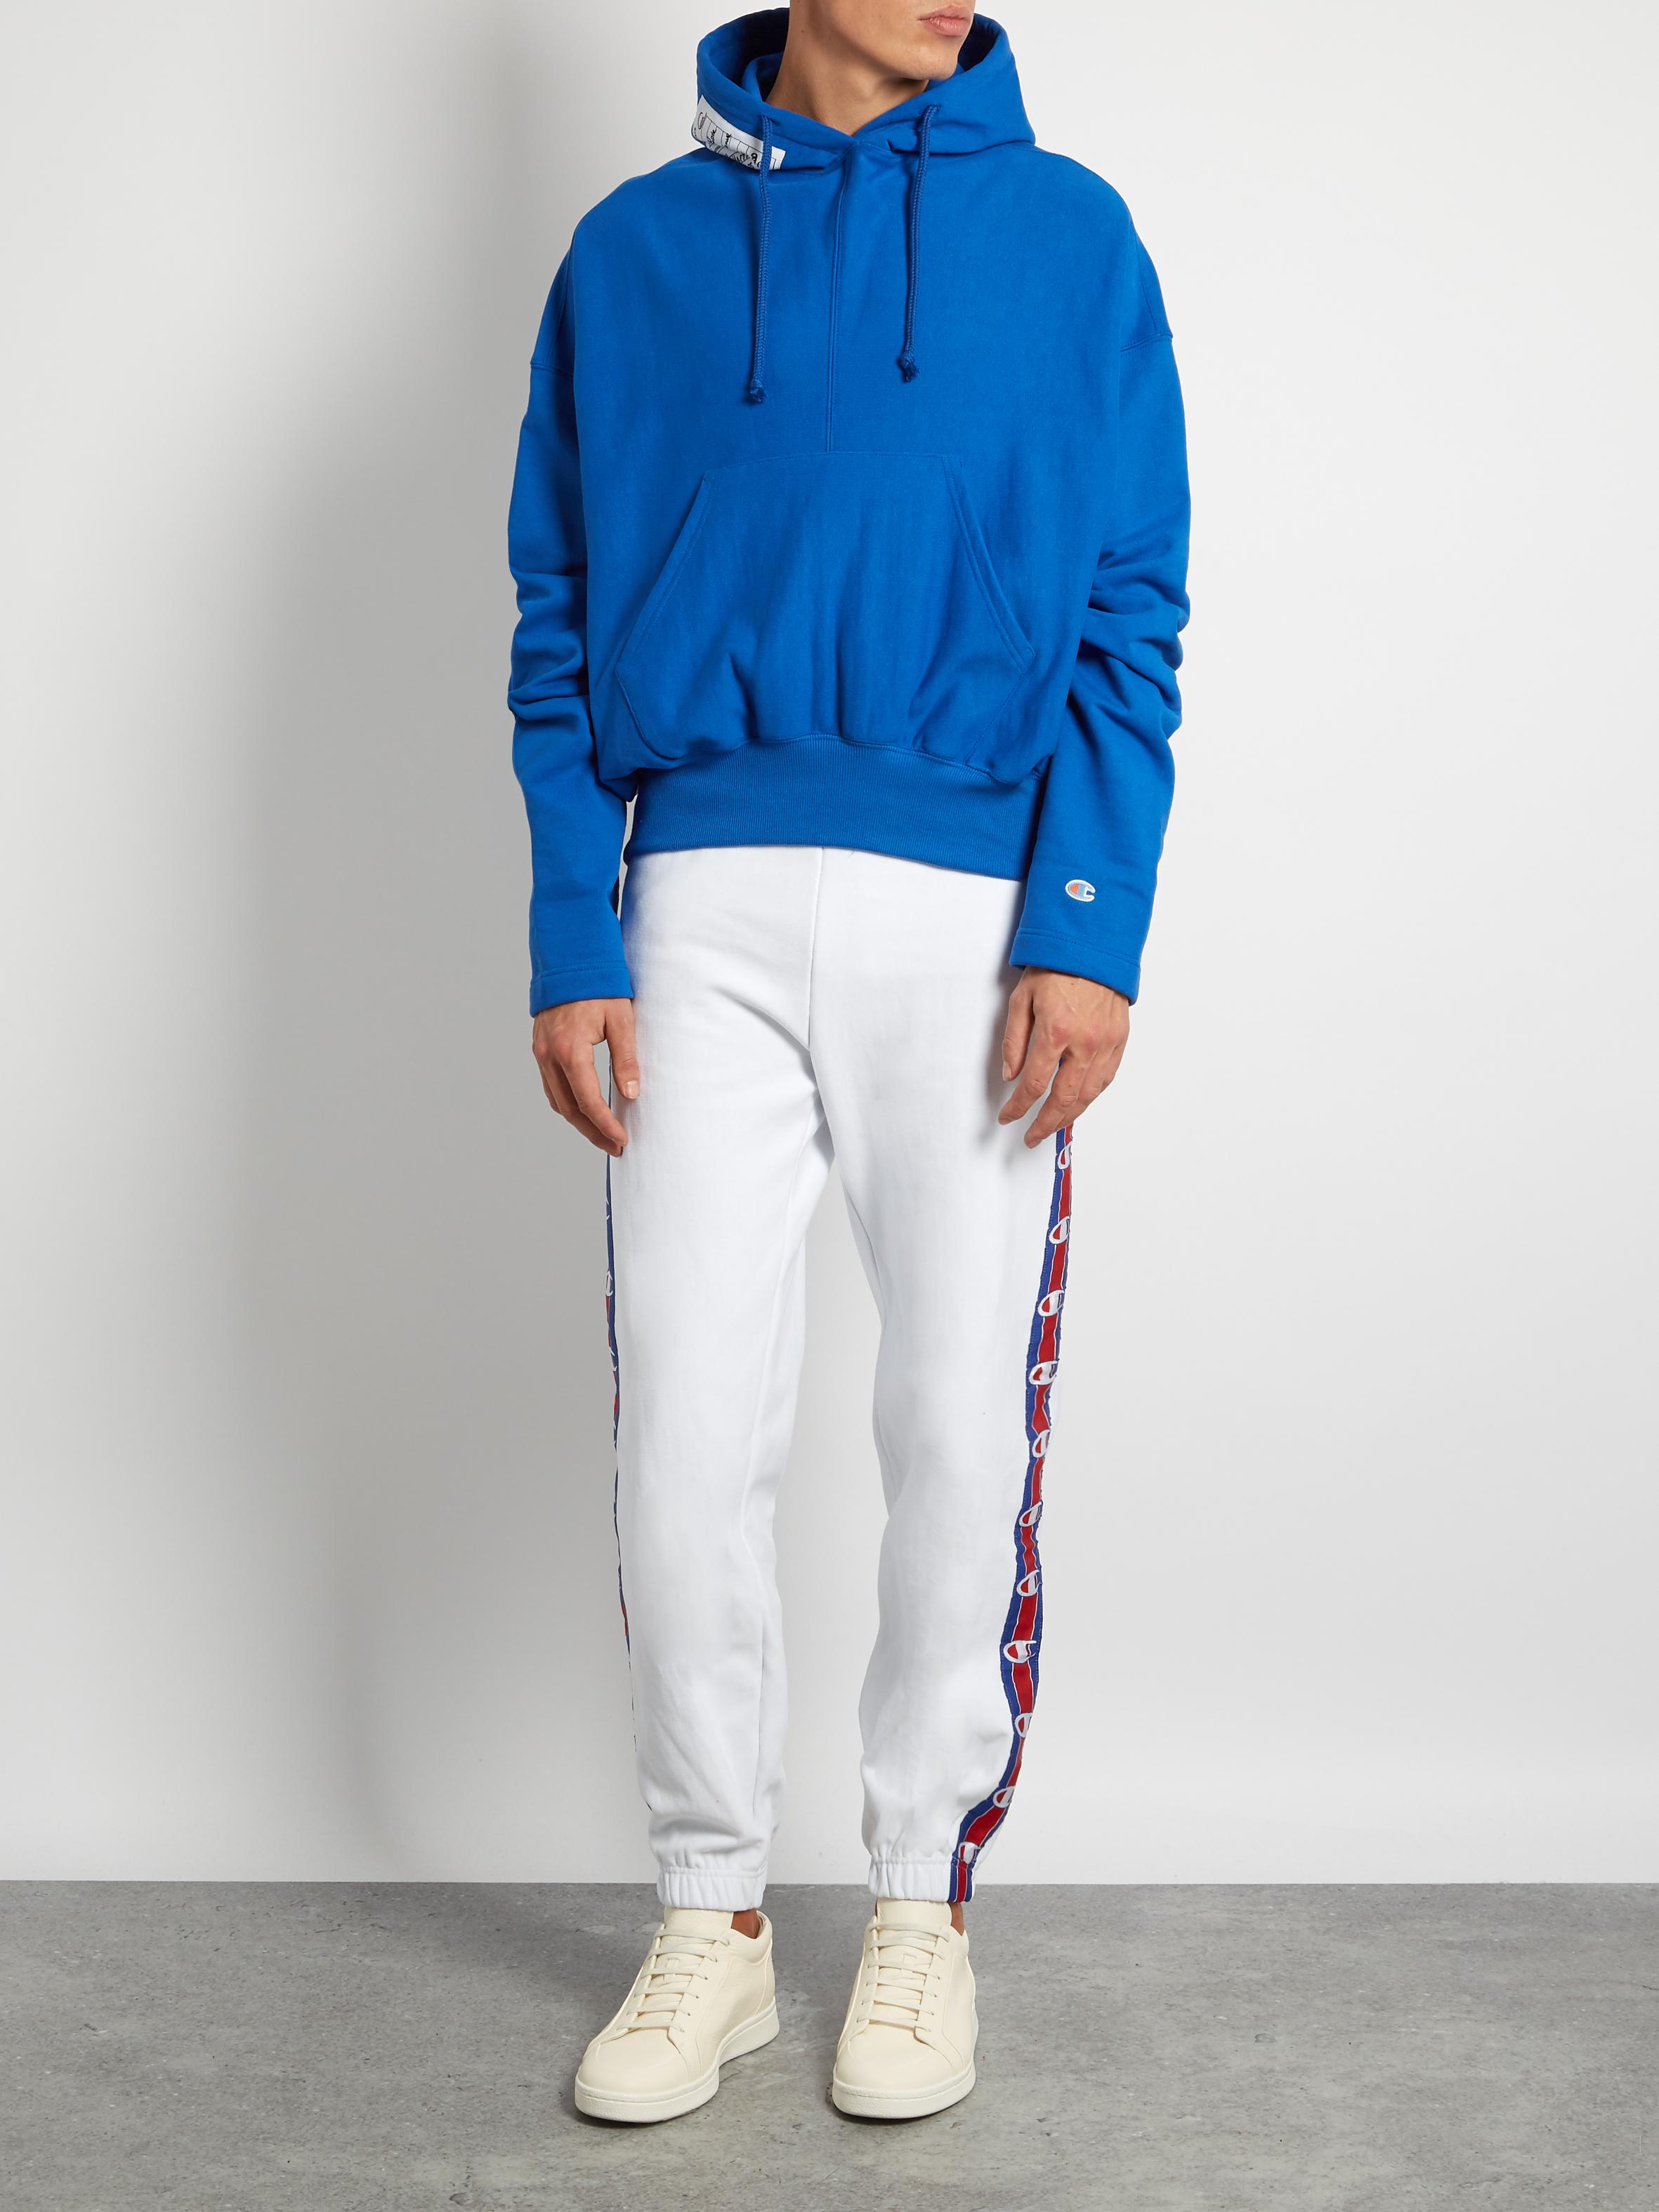 Vetements Cotton X Champion Hooded Oversized in Blue for Men - Lyst